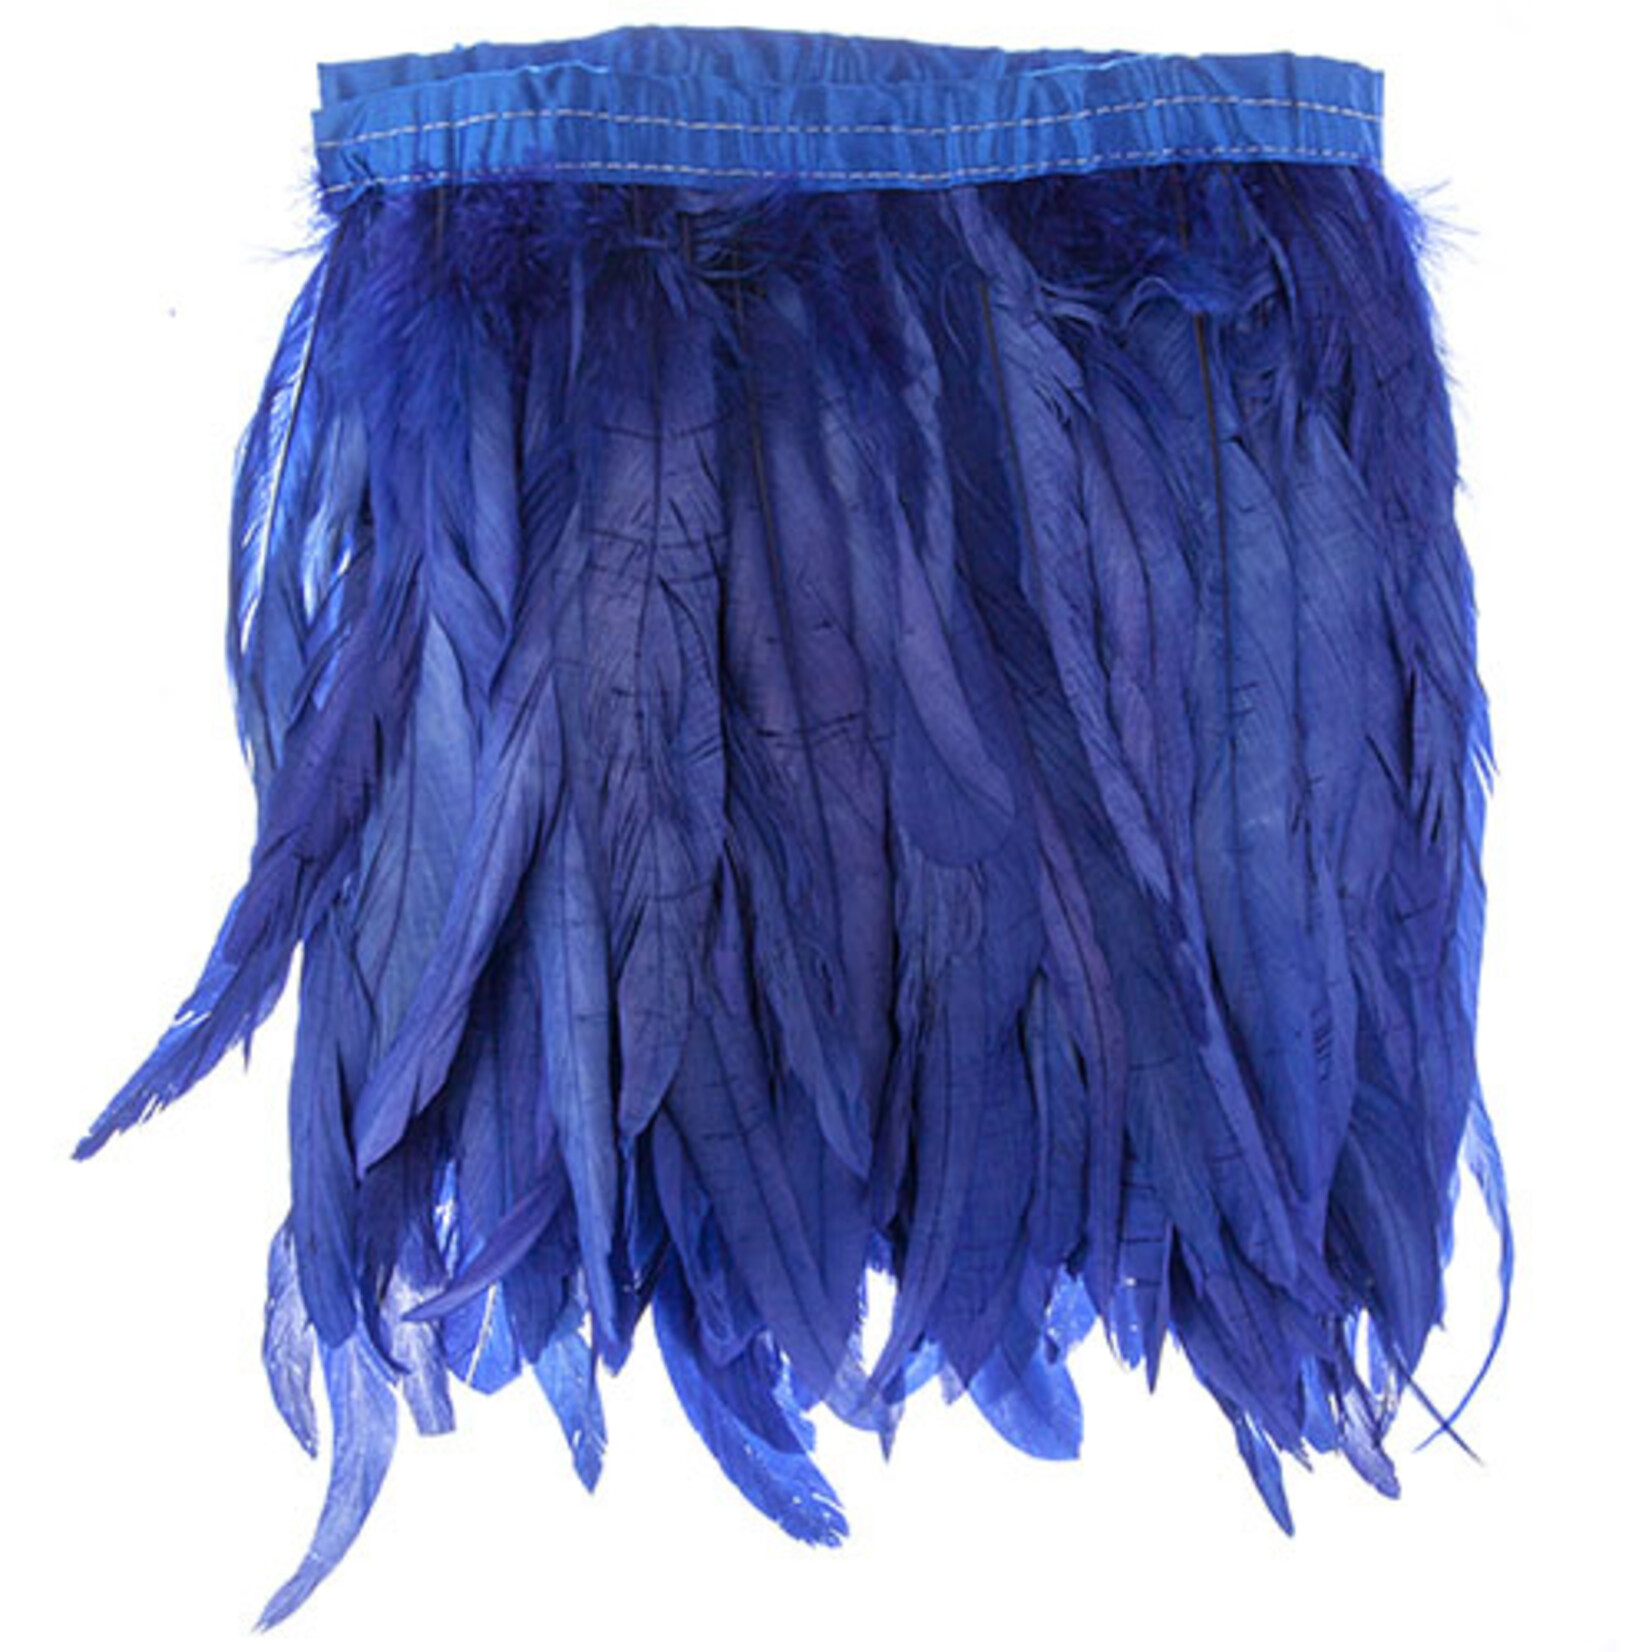 Coque Feathers Value 10-12 Inches 1 Yard Royal Blue